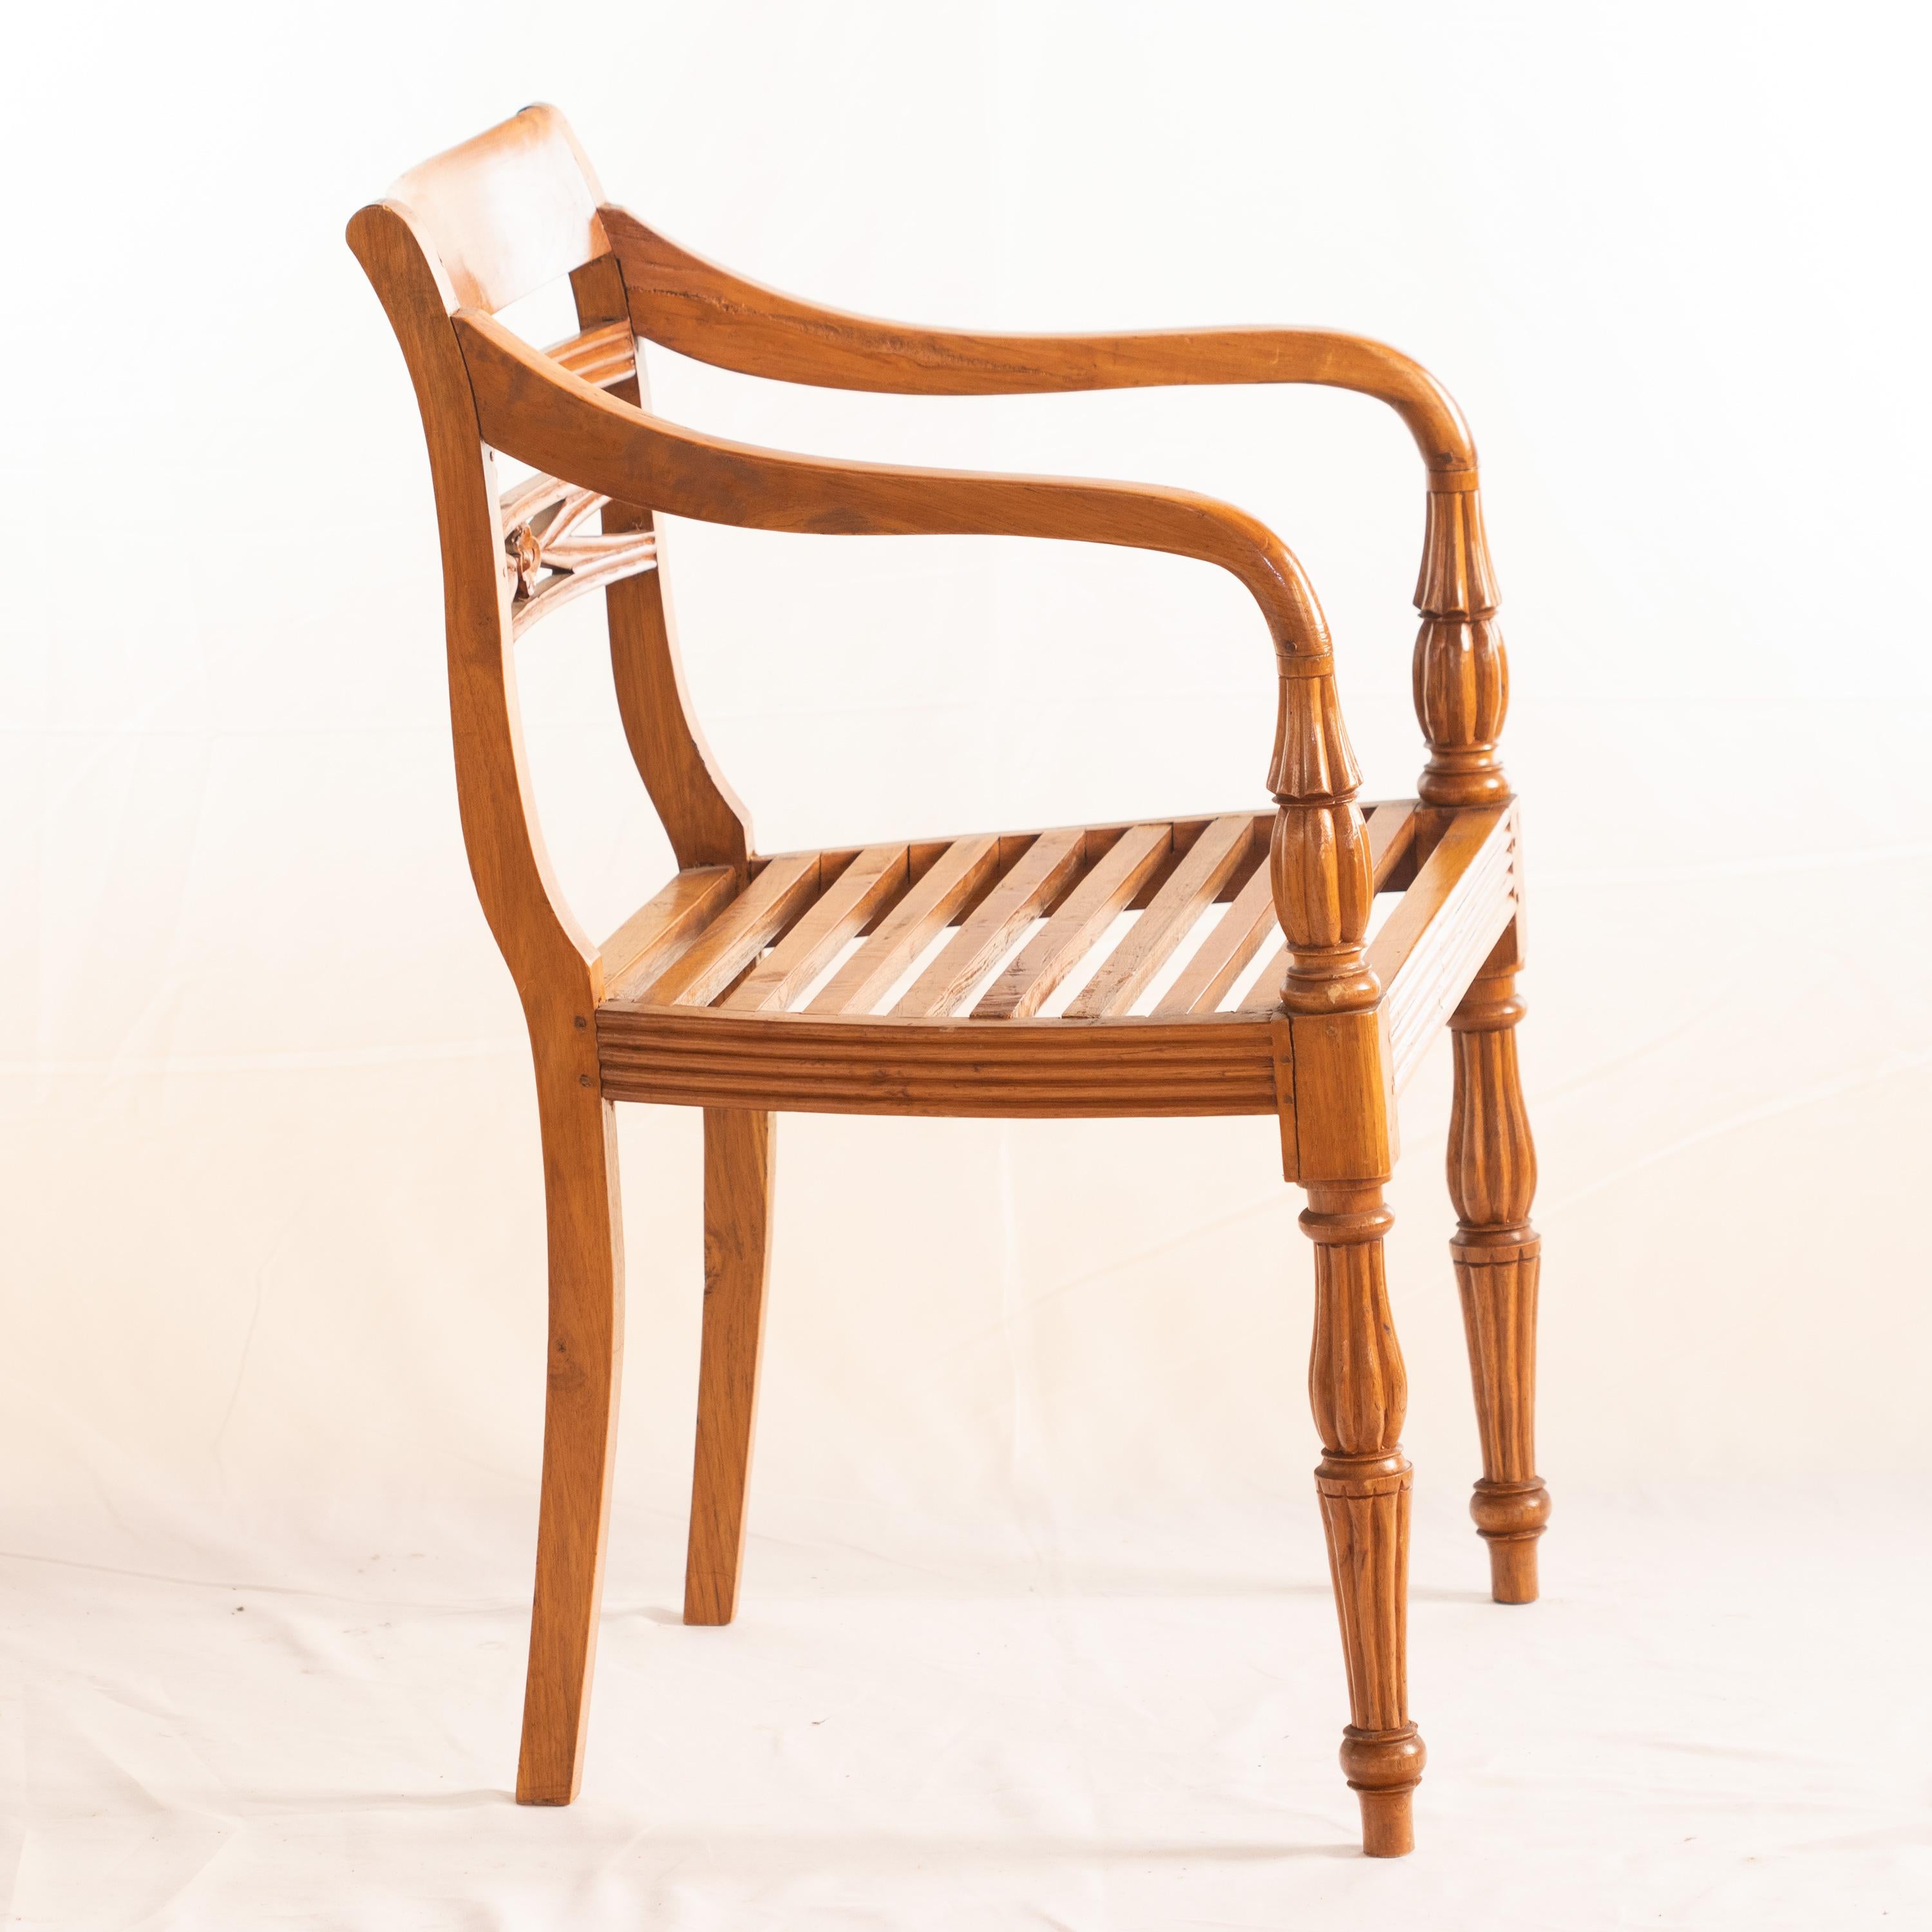 Chinese Export Wood Chair Light Brown Minimalist Carved Vintage Italian Wood Chair Furniture